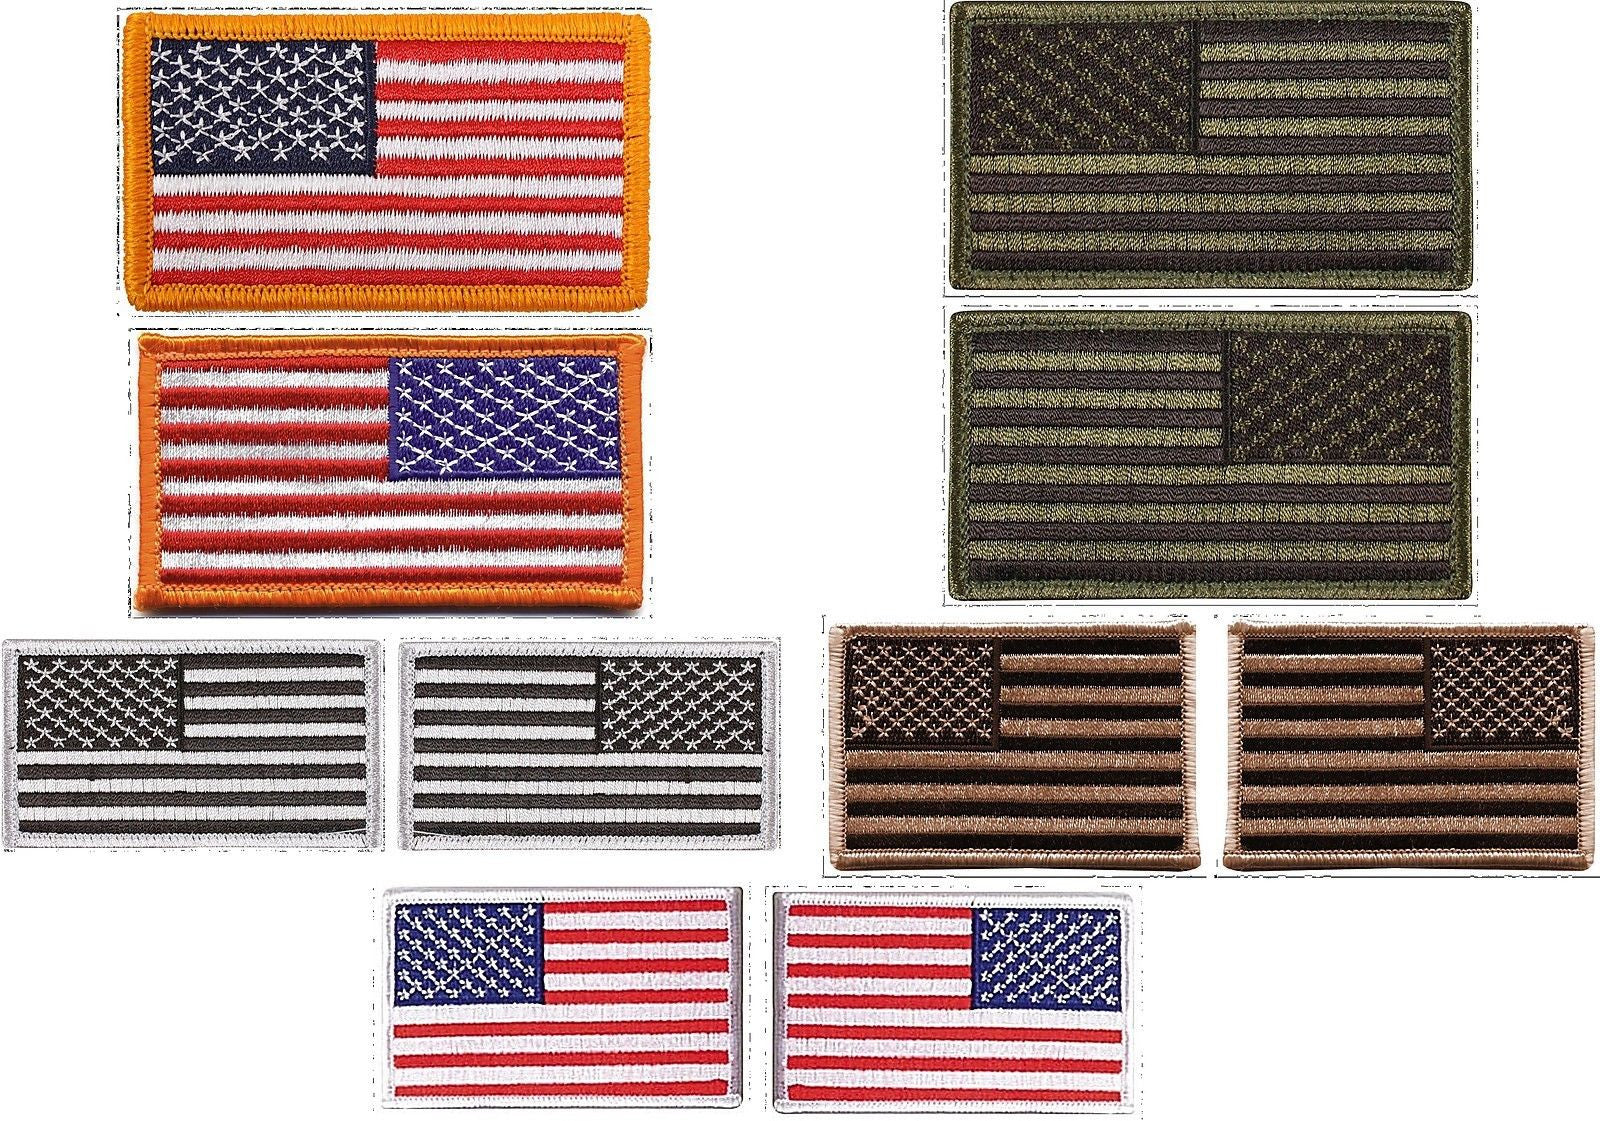 American Flag Embroidered Patch Reverse Gold Border United States Iron-On Emblem